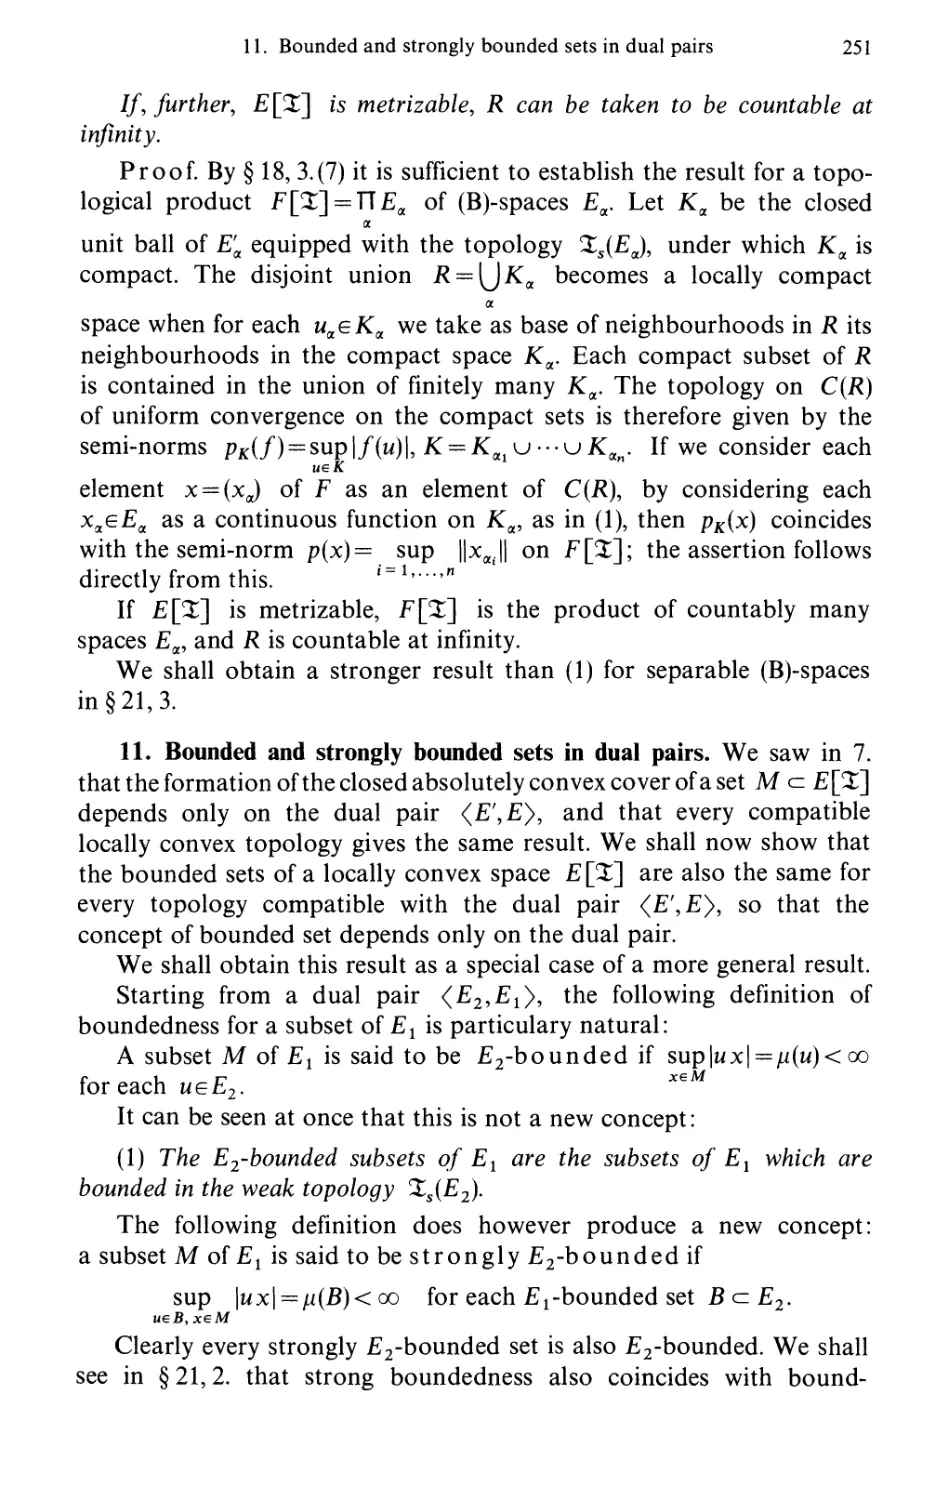 11. Bounded and strongly bounded sets in dual pairs